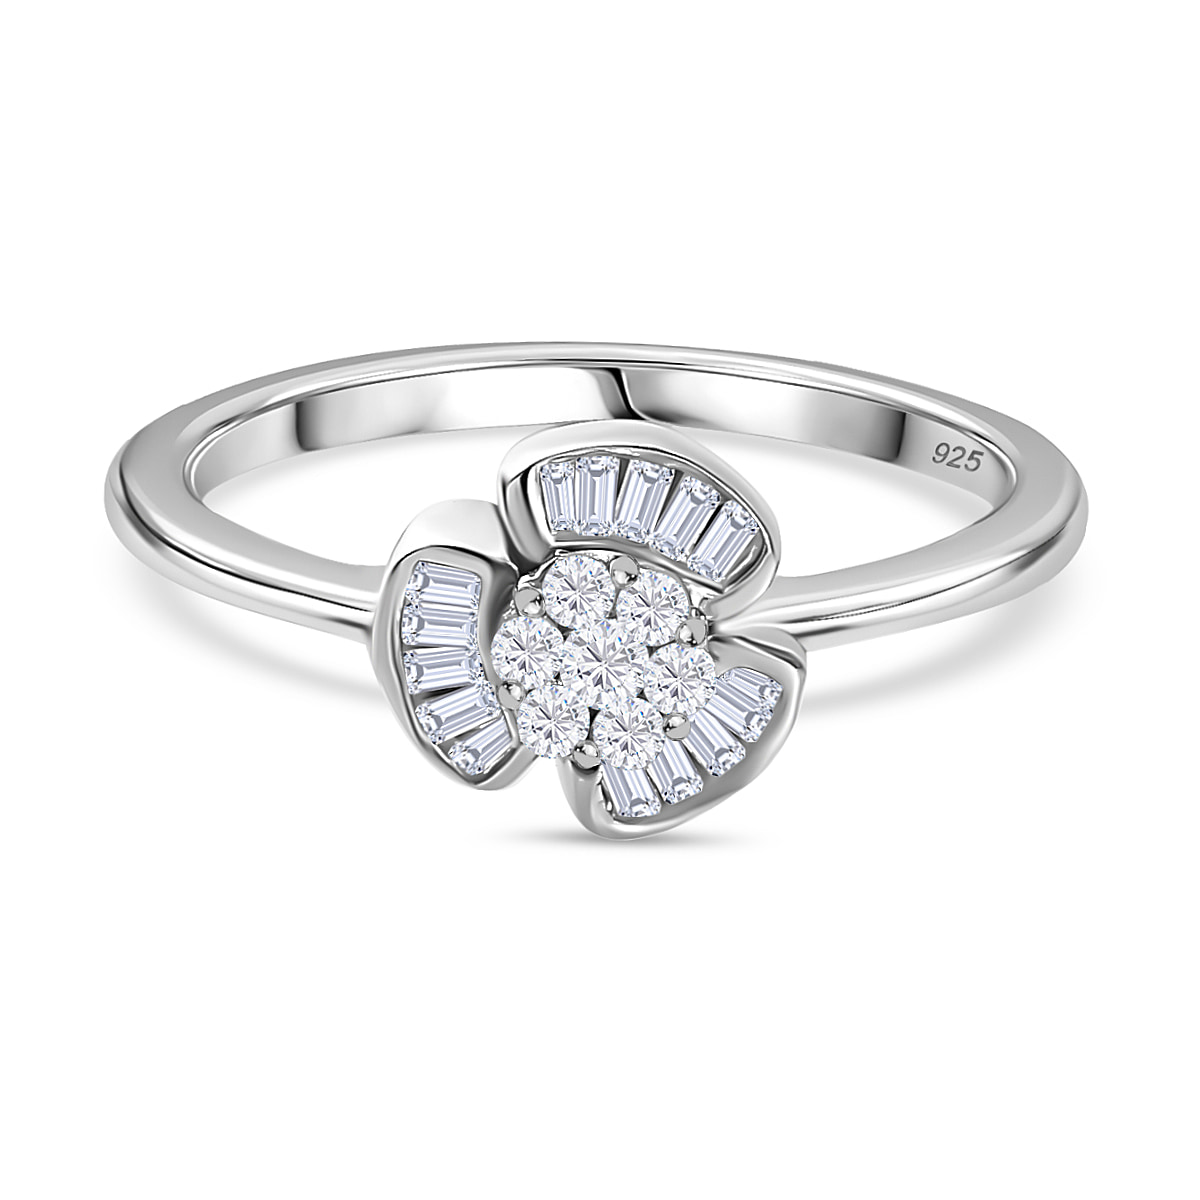 Diamond Floral Ring in Platinum Overlay Sterling Silver 0.25 Ct.